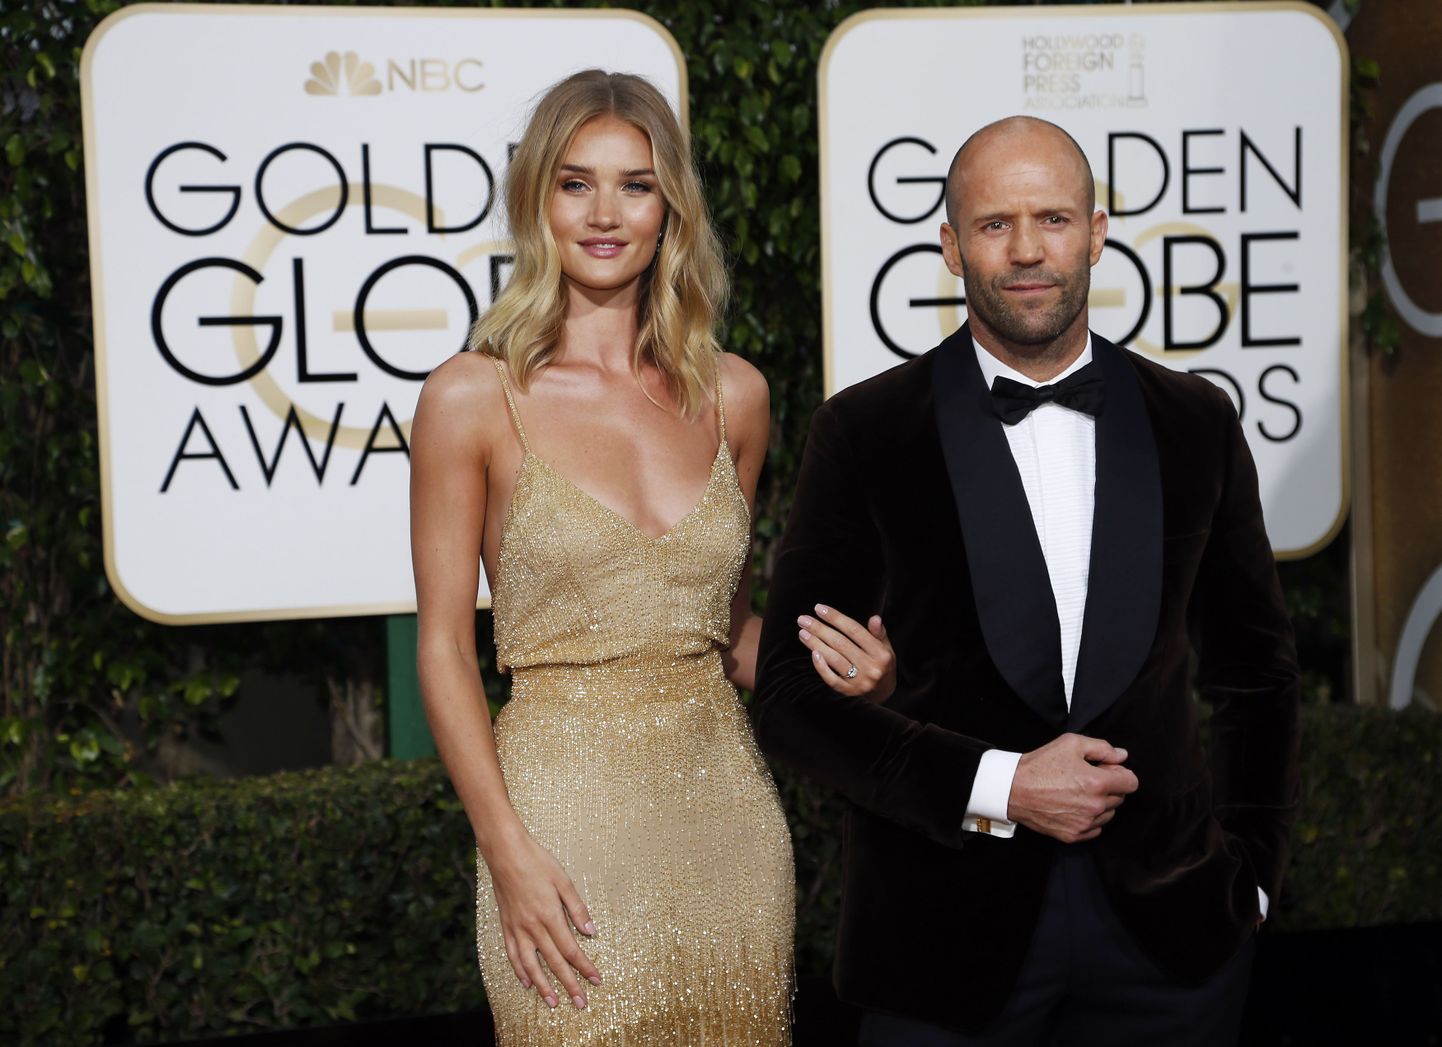 Rosie Huntington-Whiteley and Jason Stratham arrive at the 73rd Golden Globe Awards in Beverly Hills, California January 10, 2016.  REUTERS/Mario Anzuoni